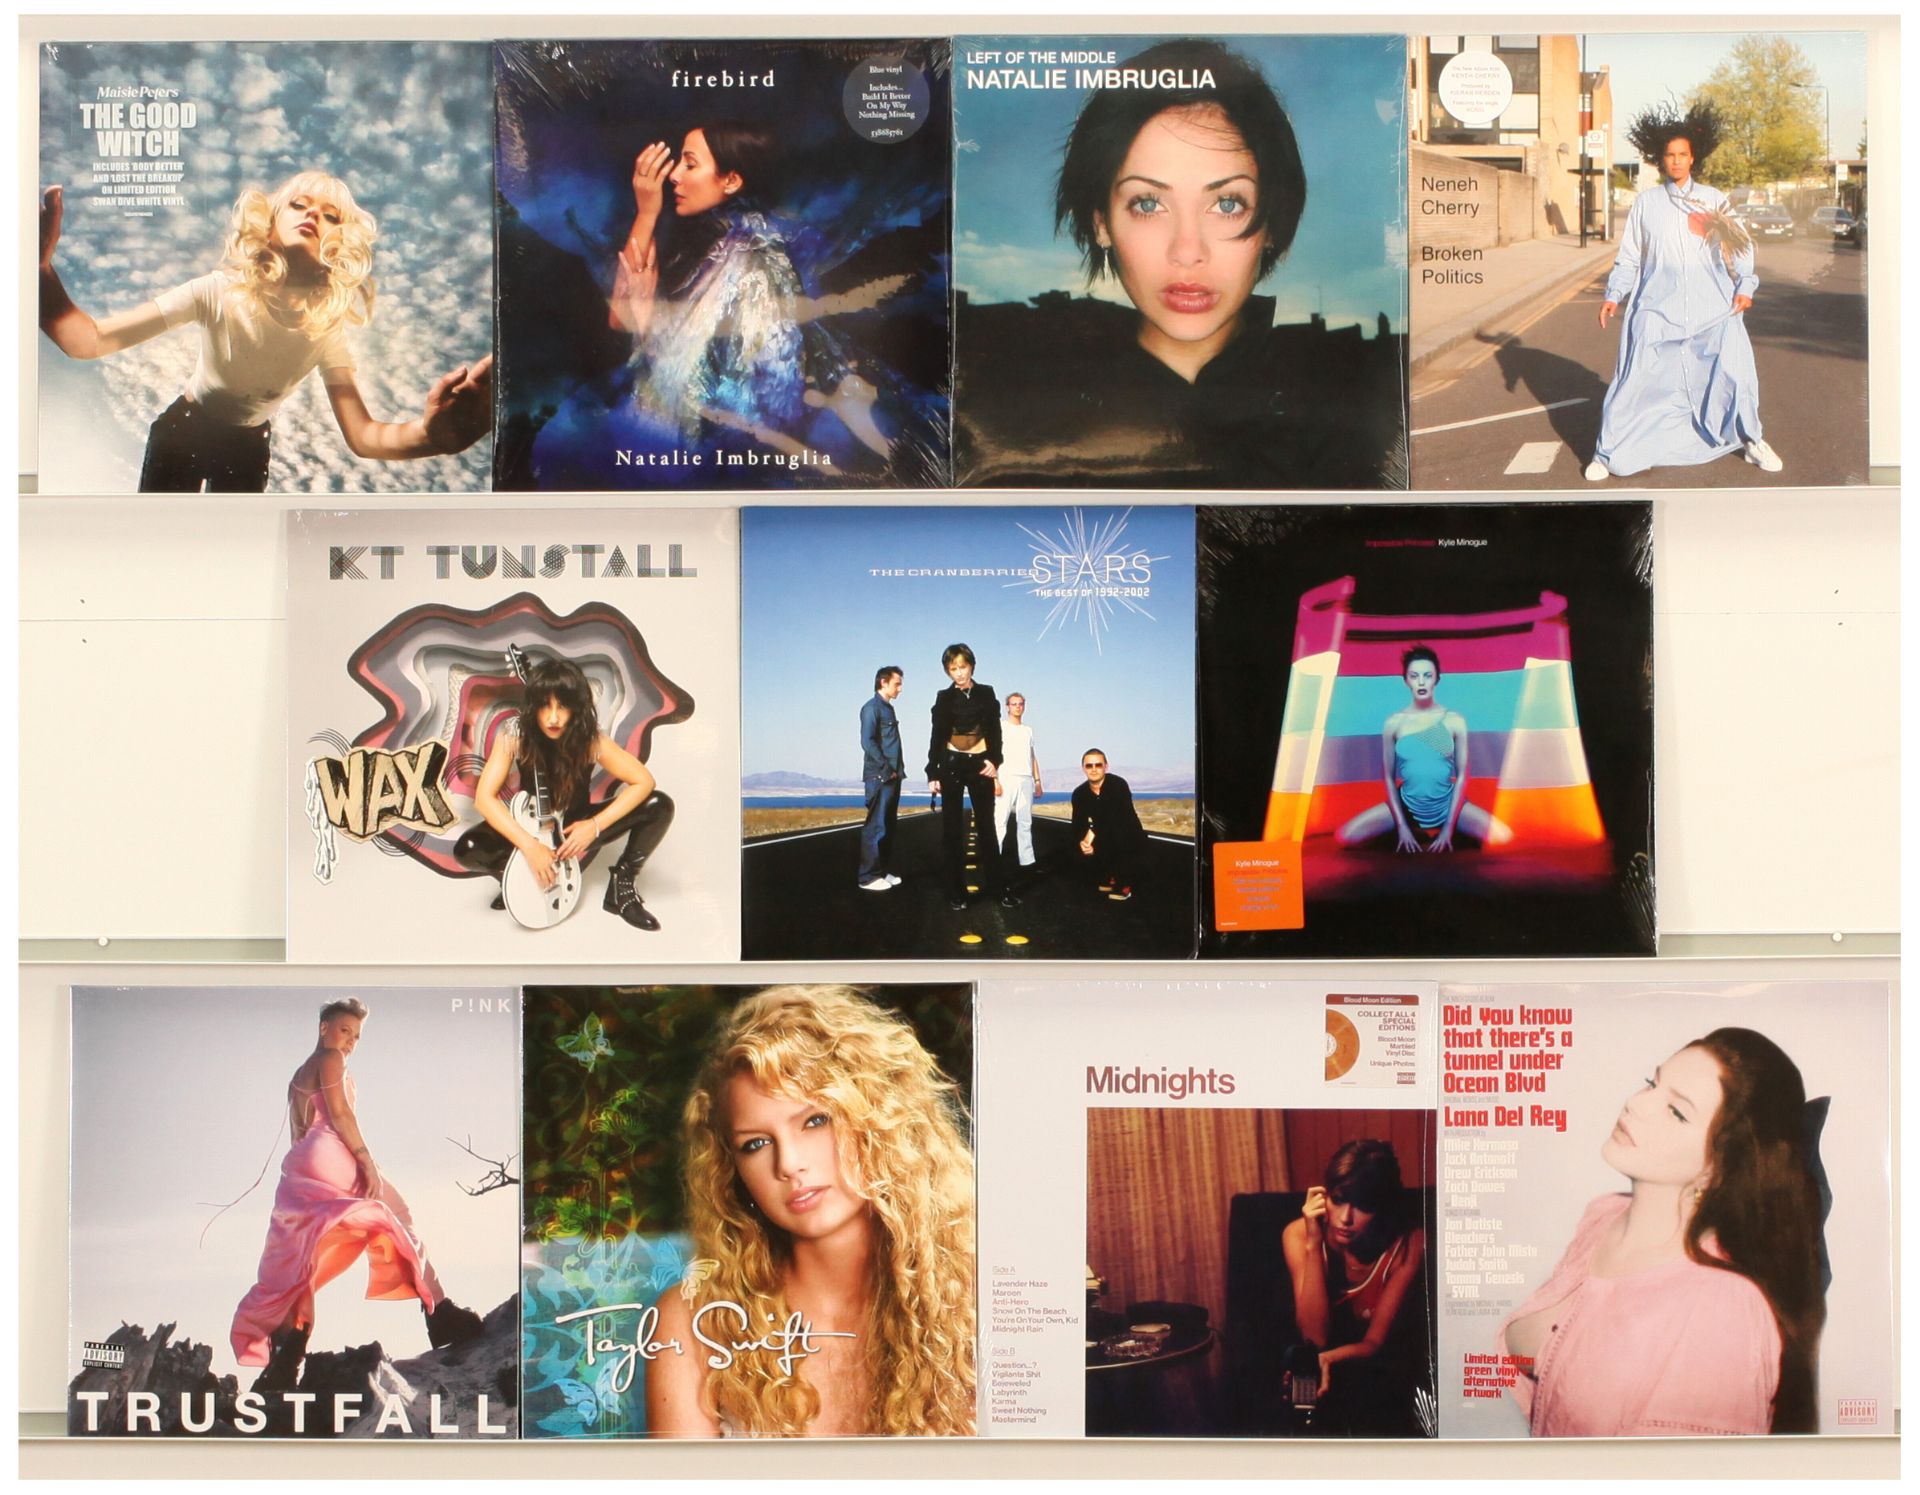 Recent LP Releases of Contemporary Female Artists - Pink, Lana Del Ray, Taylor Swift